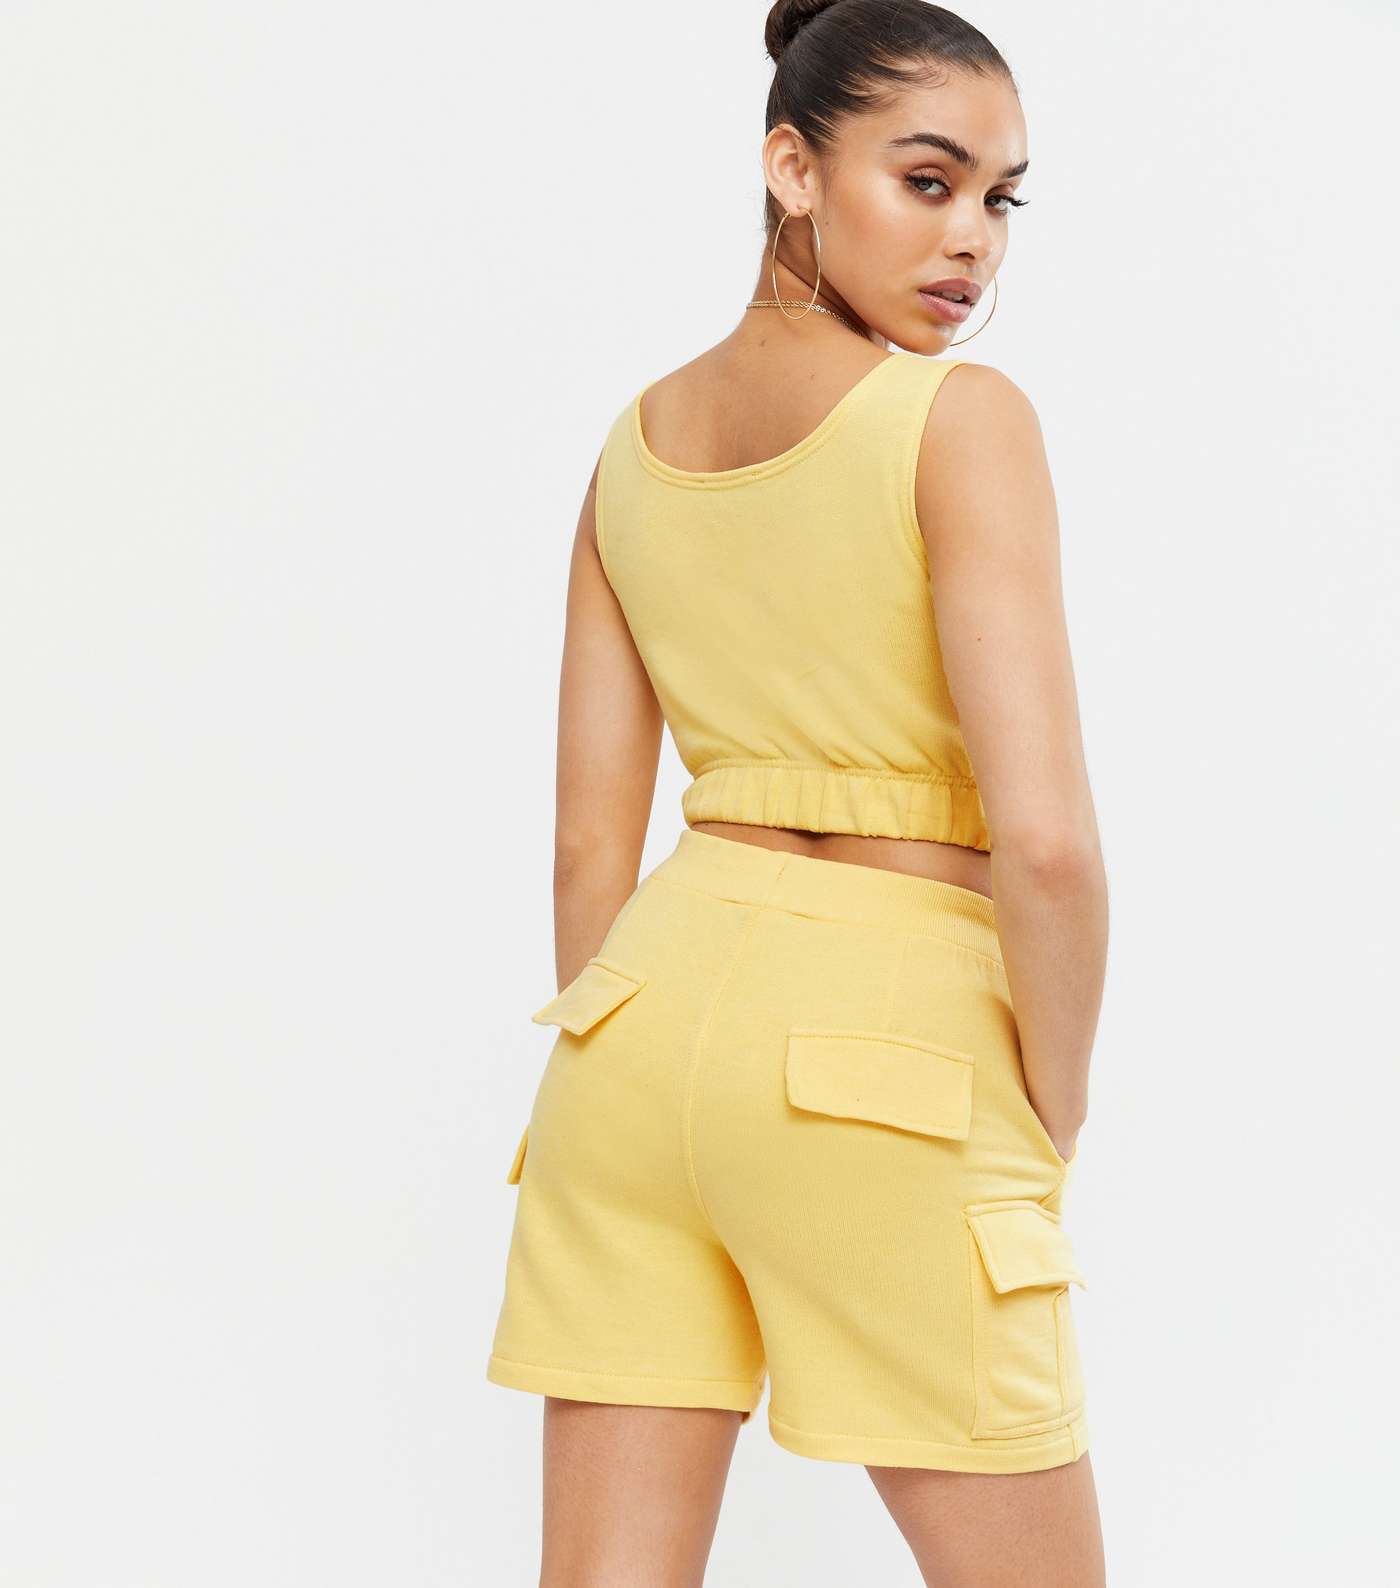 Cameo Rose Pale Yellow Utility Crop Top and Shorts Set Image 4